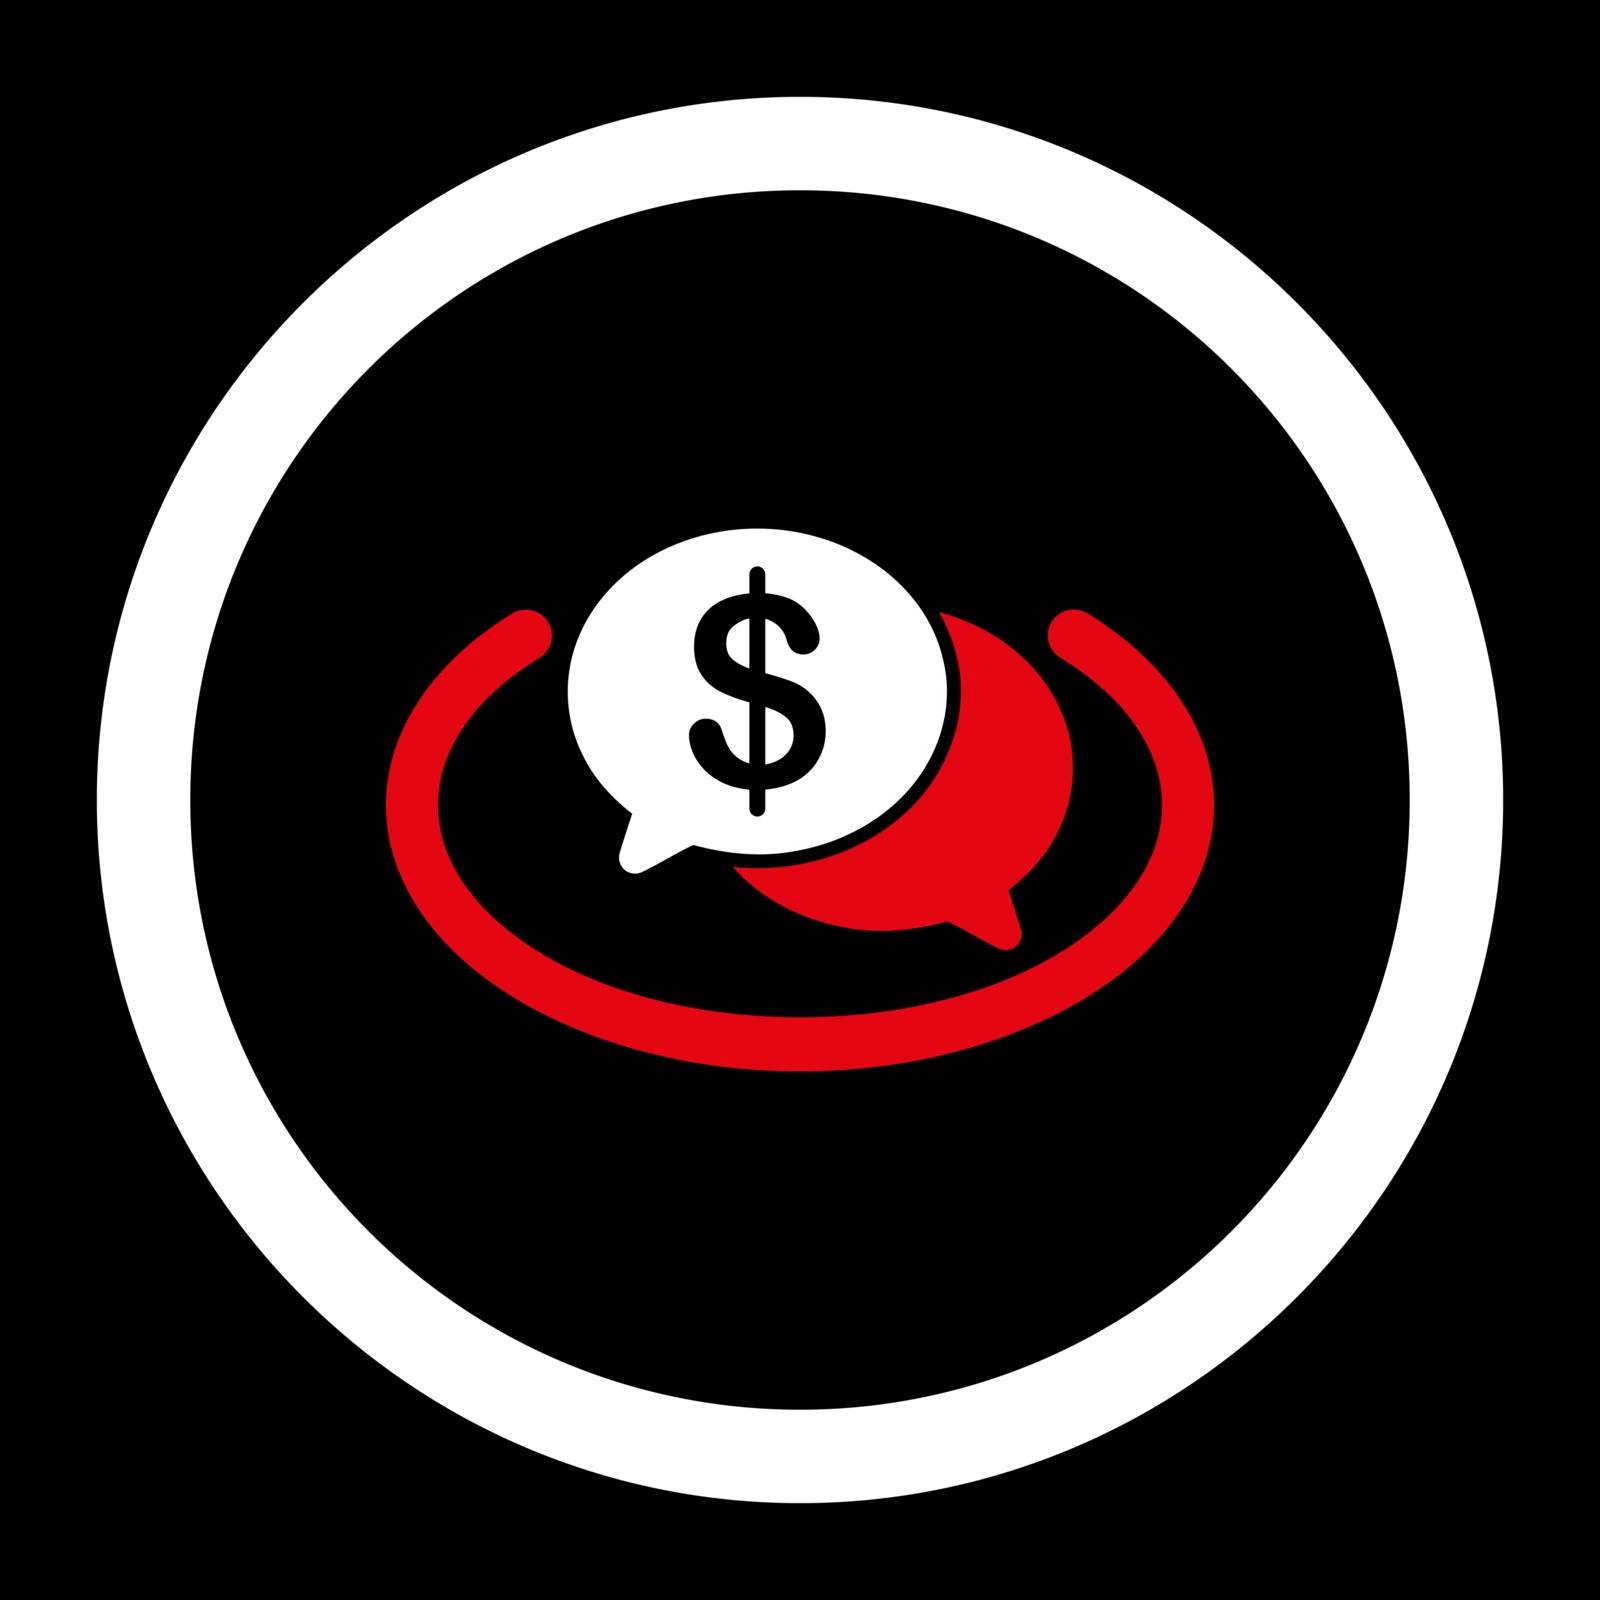 Financial Network vector icon. This flat rounded symbol uses red and white colors and isolated on a black background.